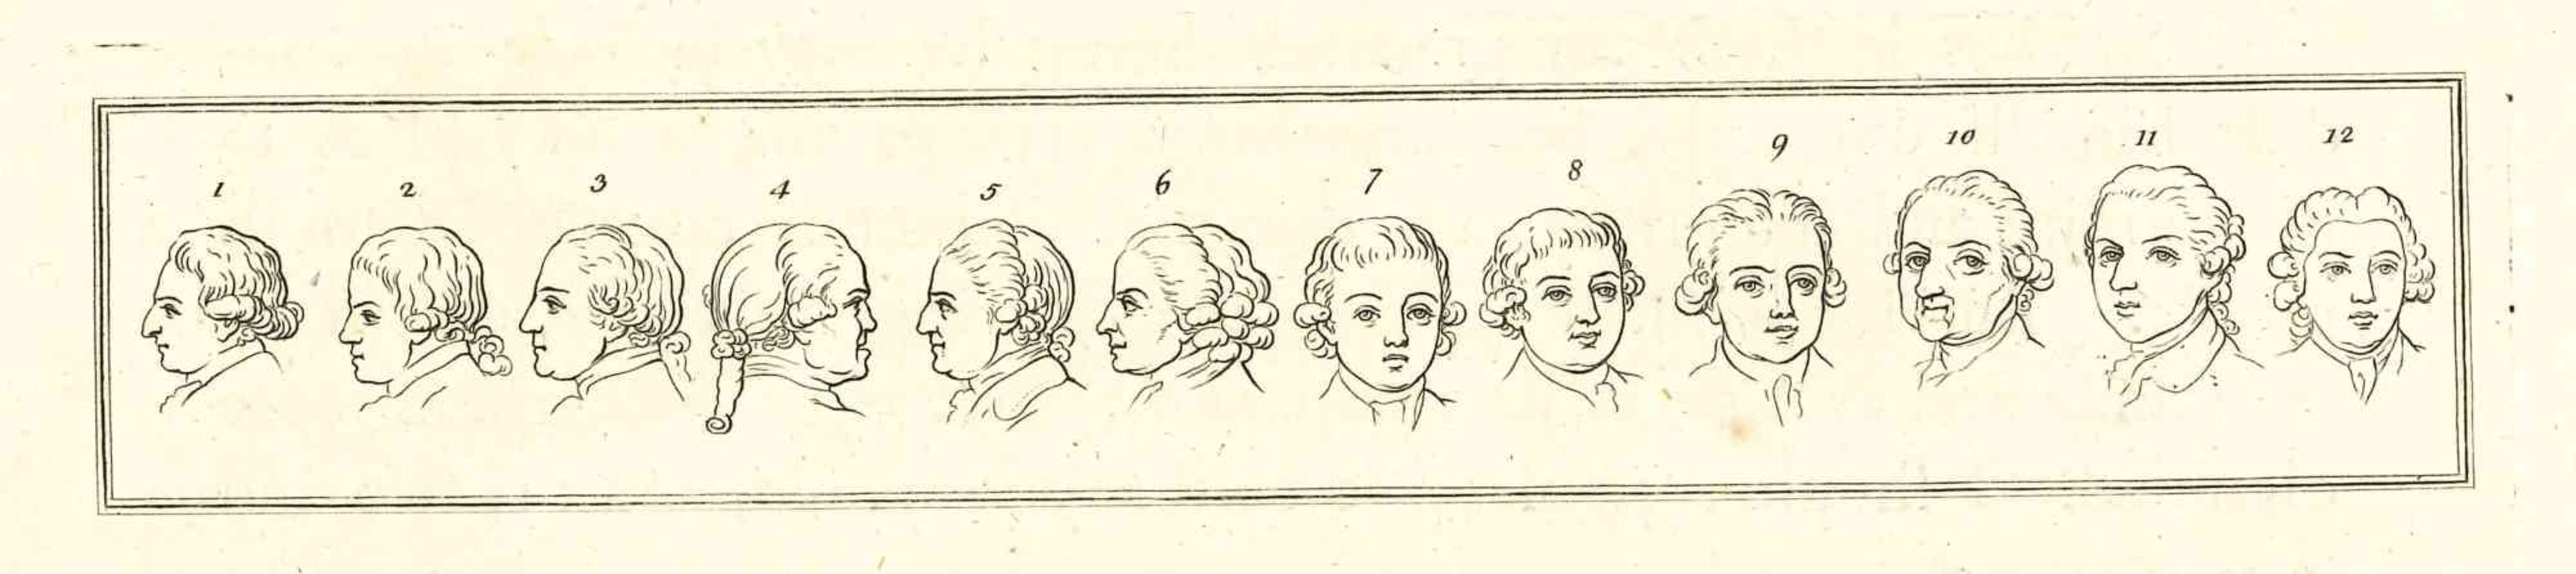 Heads of men is an original artwork realized by Thomas Holloway for Johann Caspar Lavater's  "Essays on Physiognomy, Designed to promote the Knowledge and the Love of Mankind", London, Bensley, 1810. 

 This artwork portrays heads of men. On the